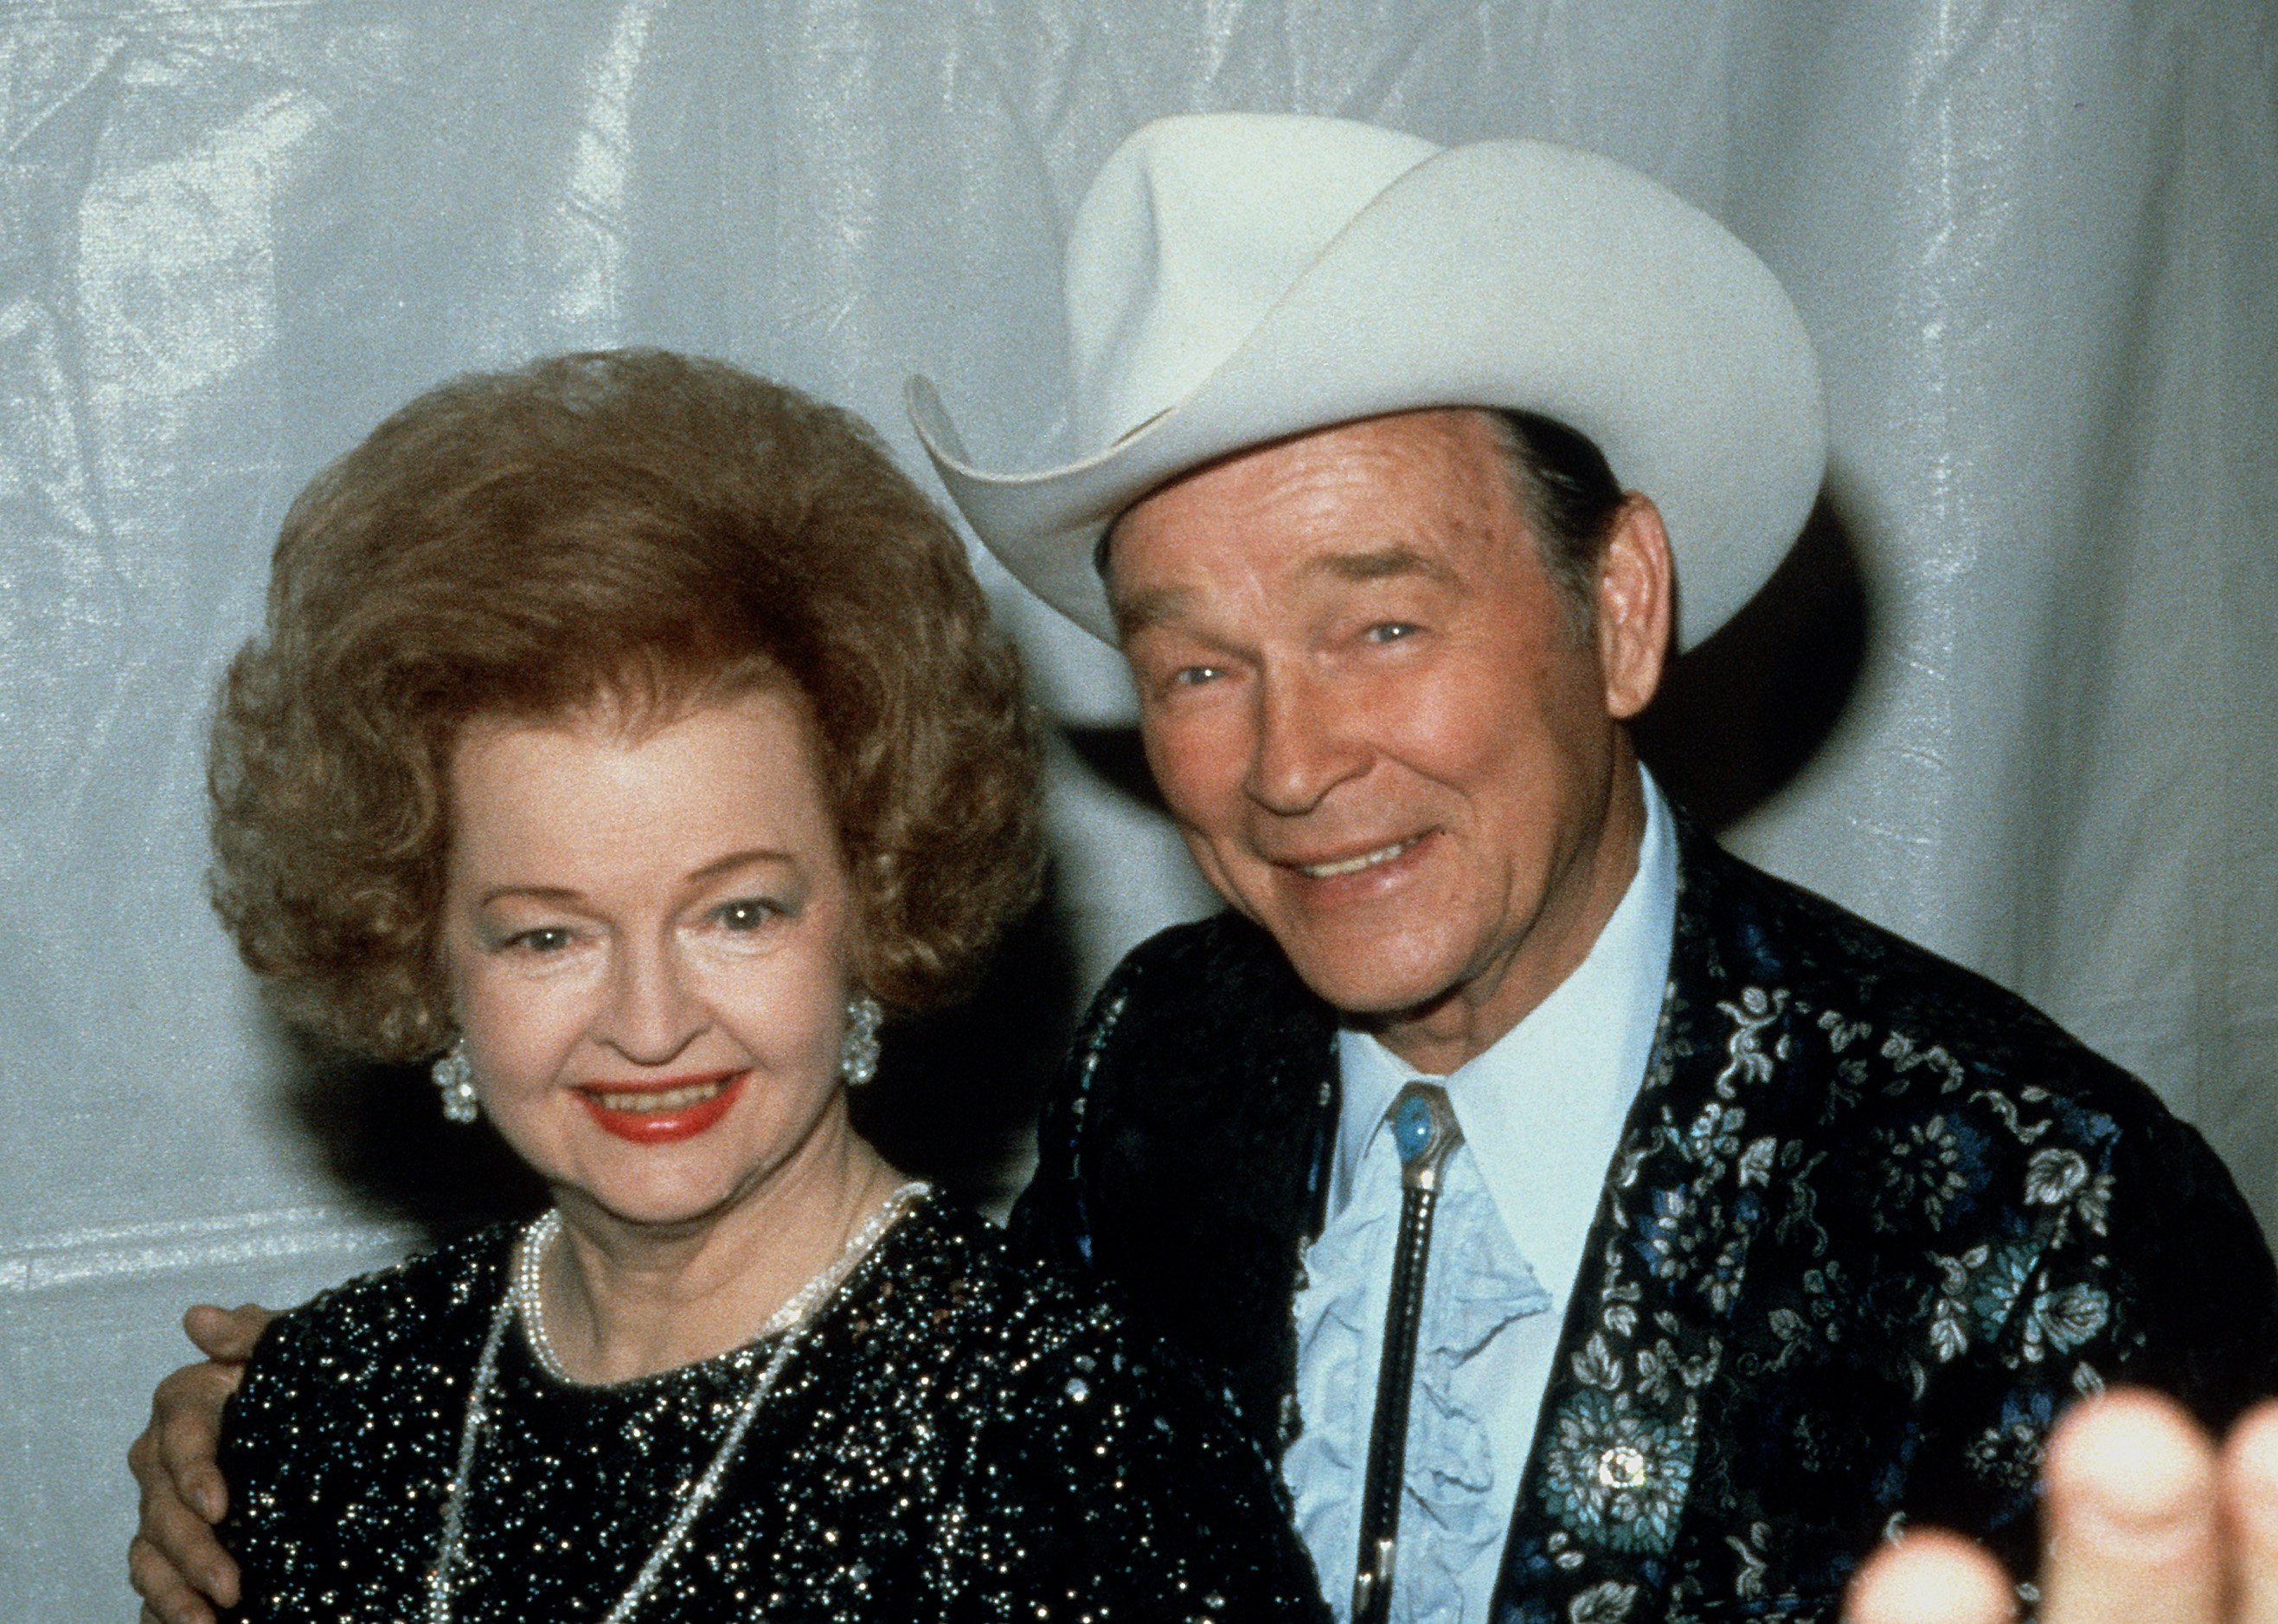 Roy Rogers (1911 - 1998) and his wife Dale Evans (1912 - 2001) pose circa 1986 in Dallas, USA. | Source: Getty Images.